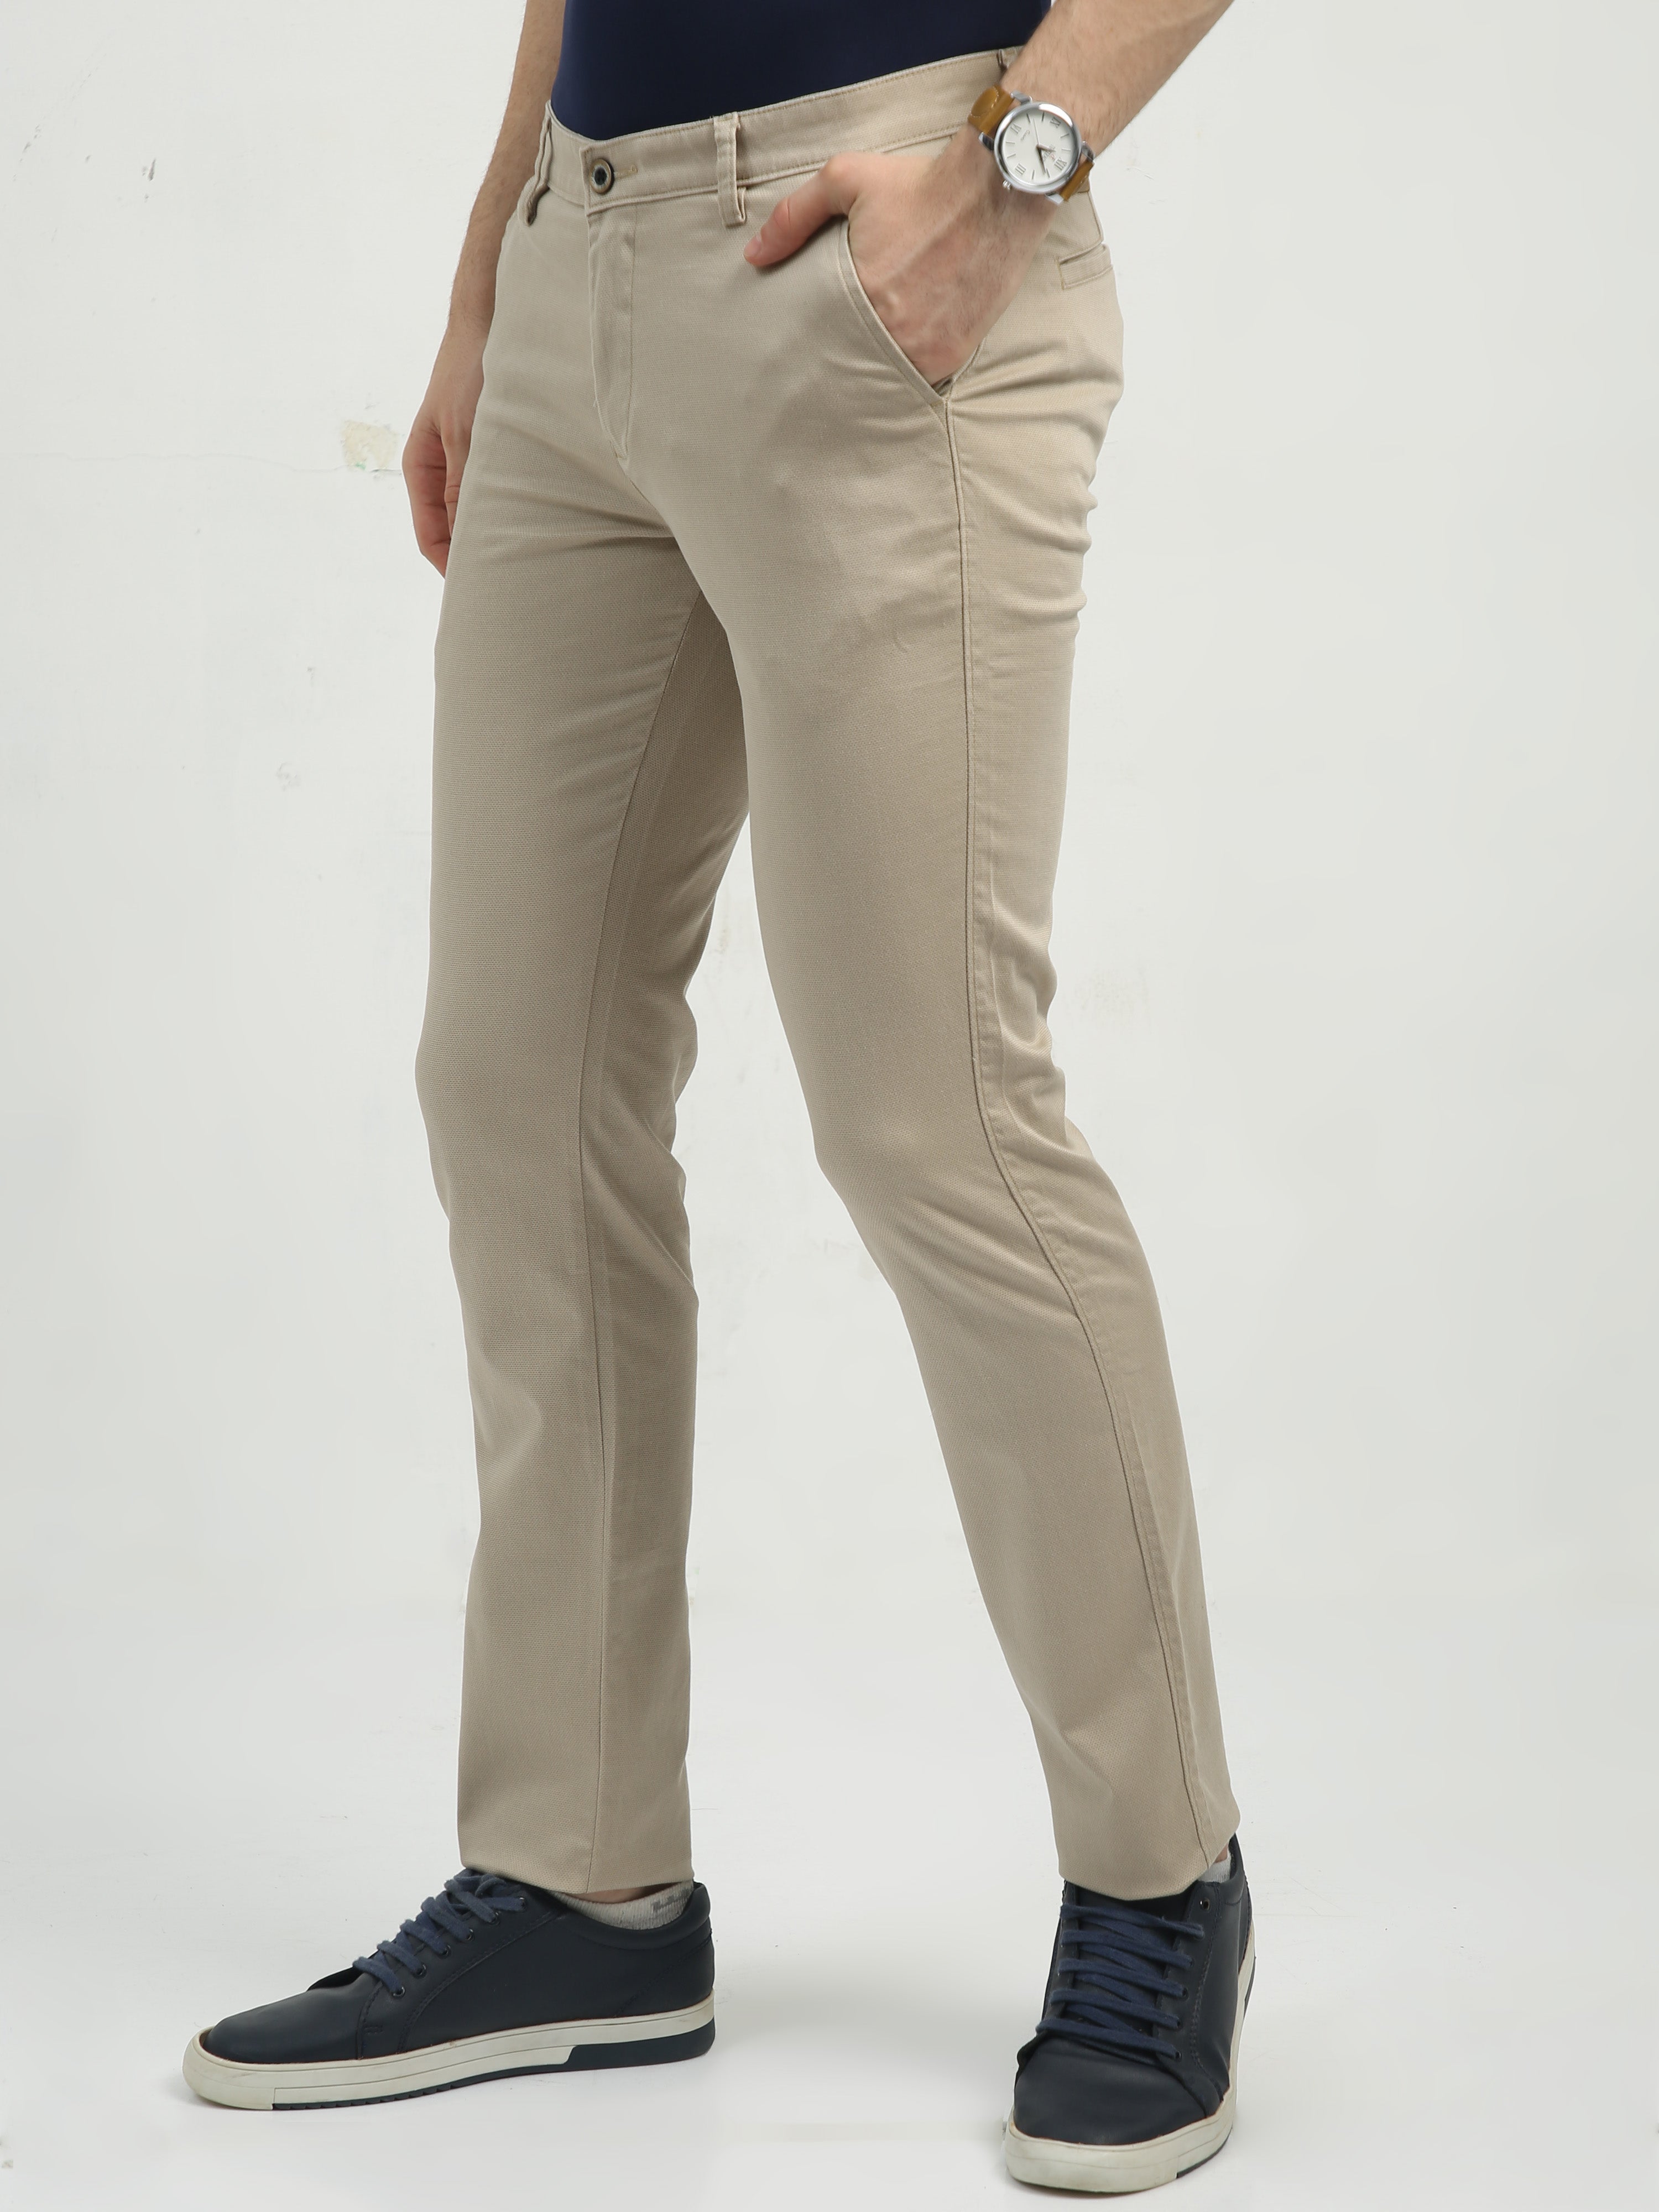 Classic Polo Men's   Chiseled Fit Cotton Trousers | TBO2-29 A-FAW-CF-LY